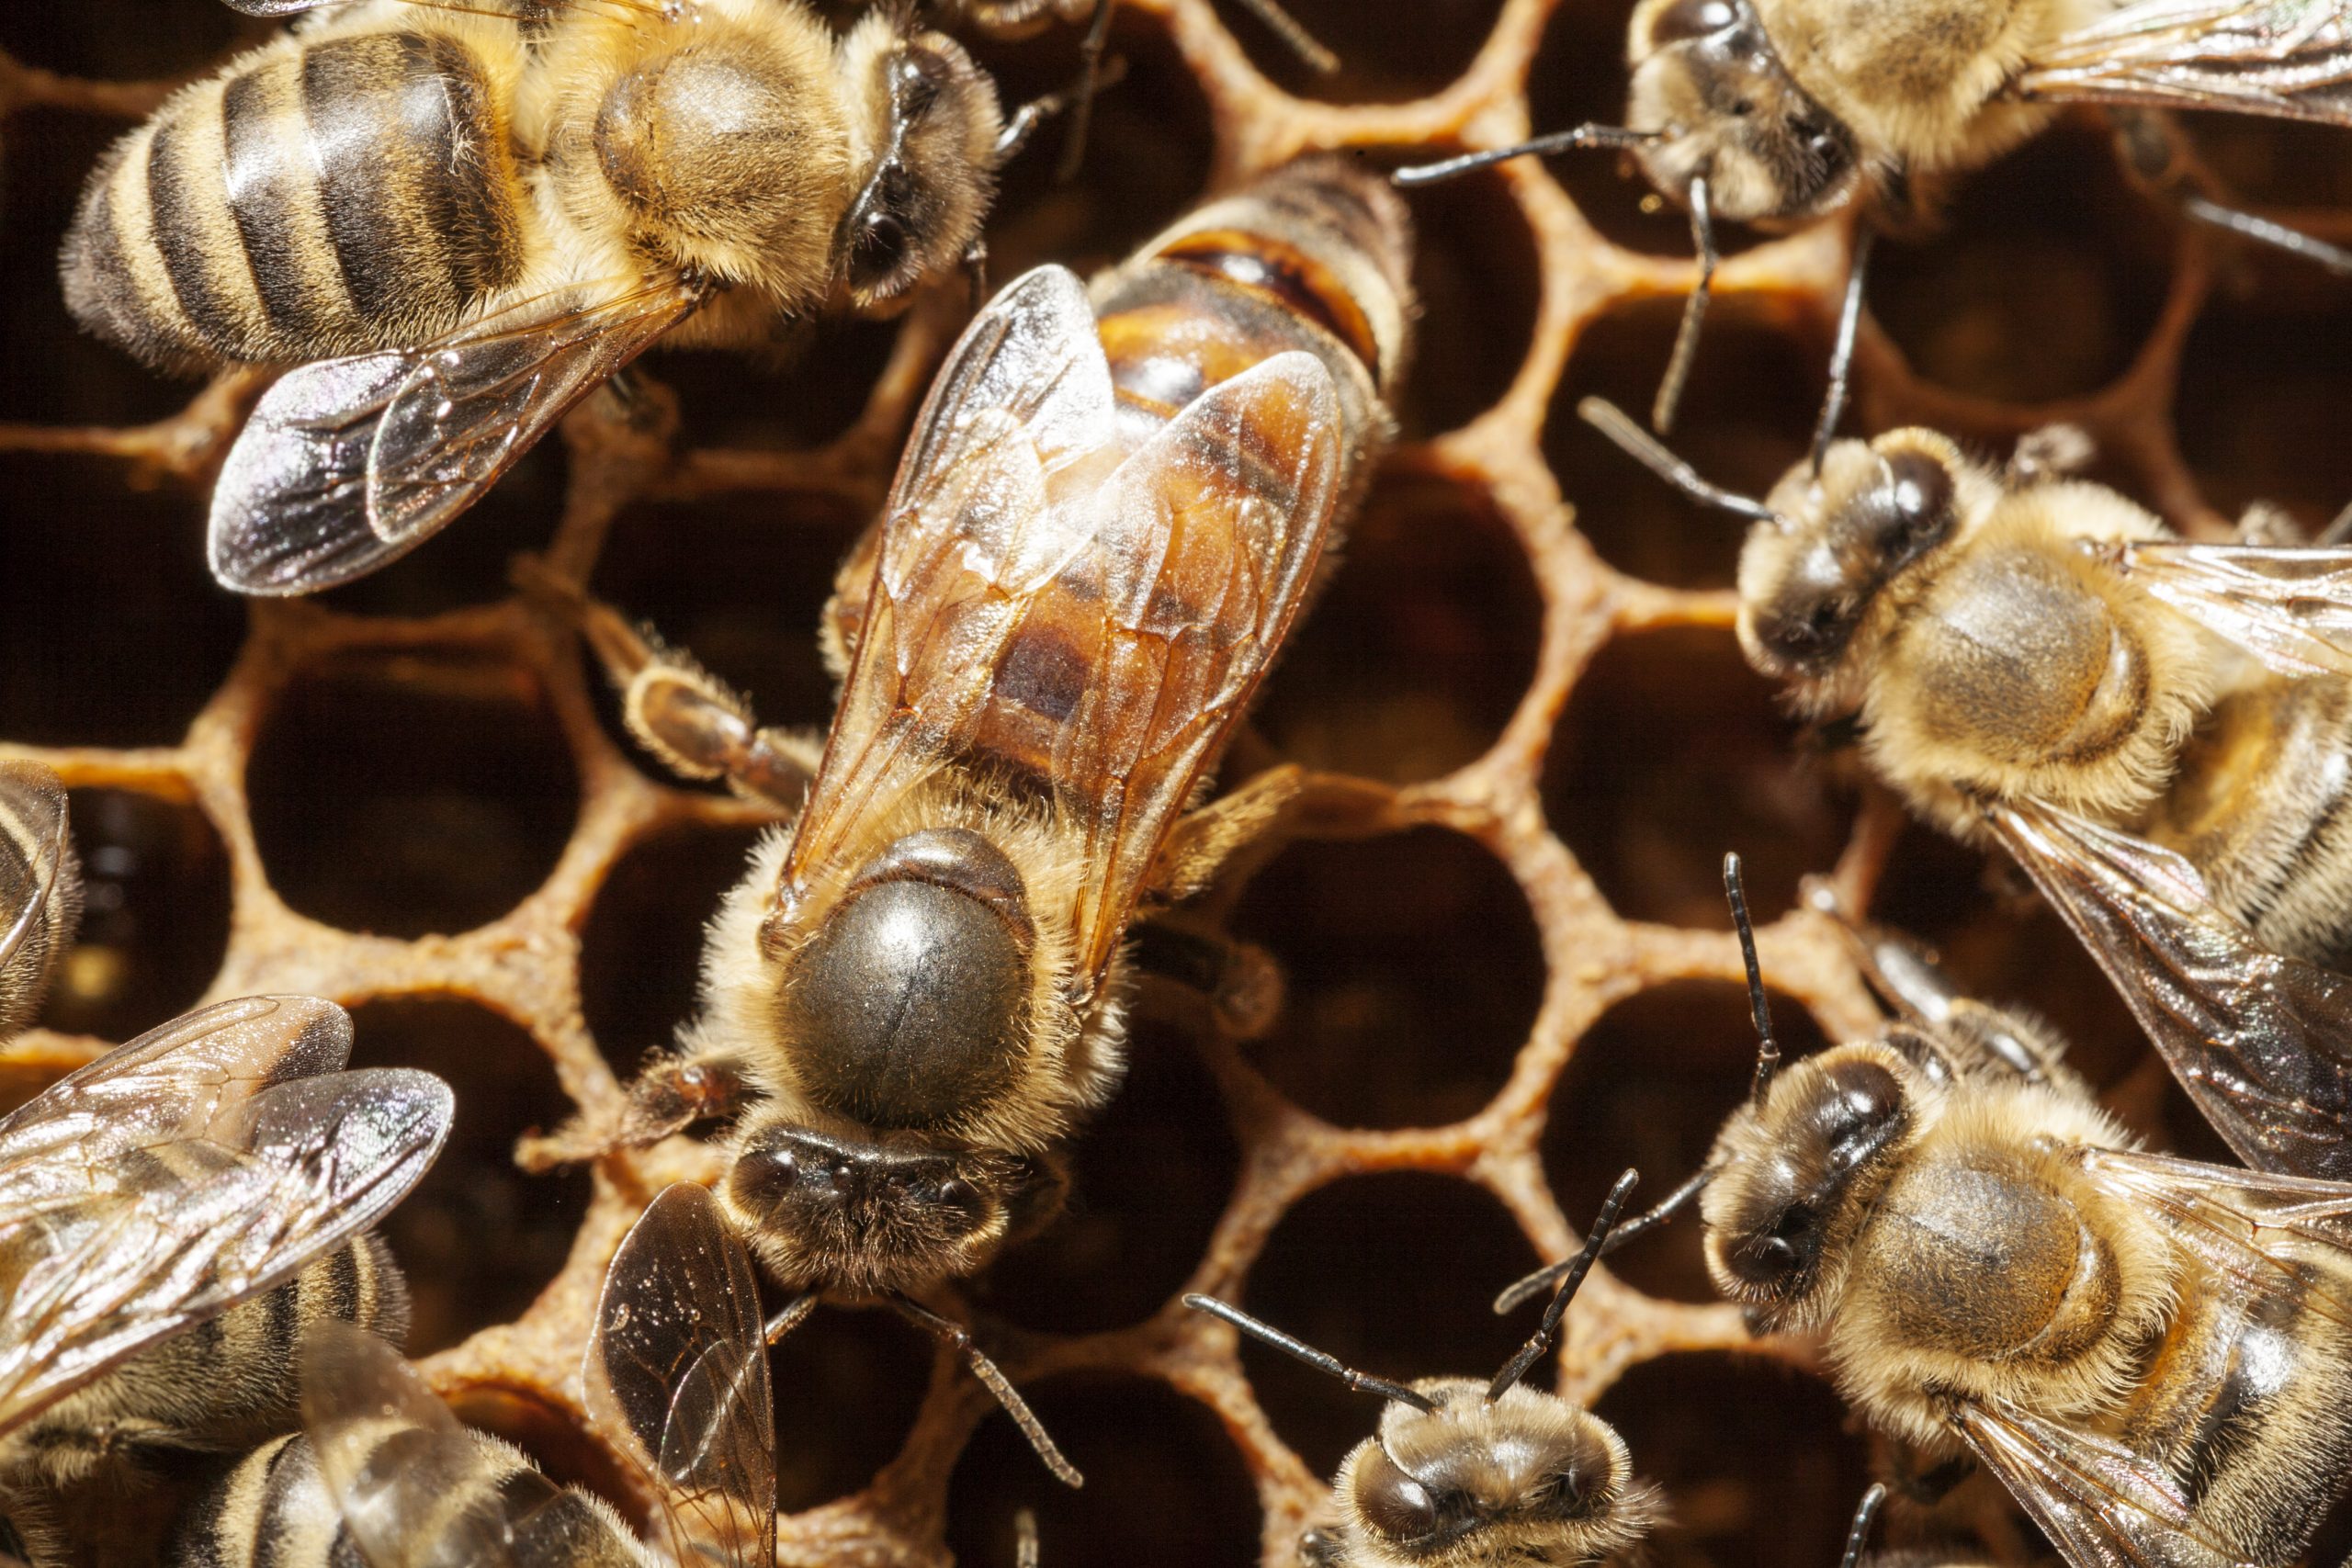 Irish Honeybees Could Be Key to All Bees’ Survival